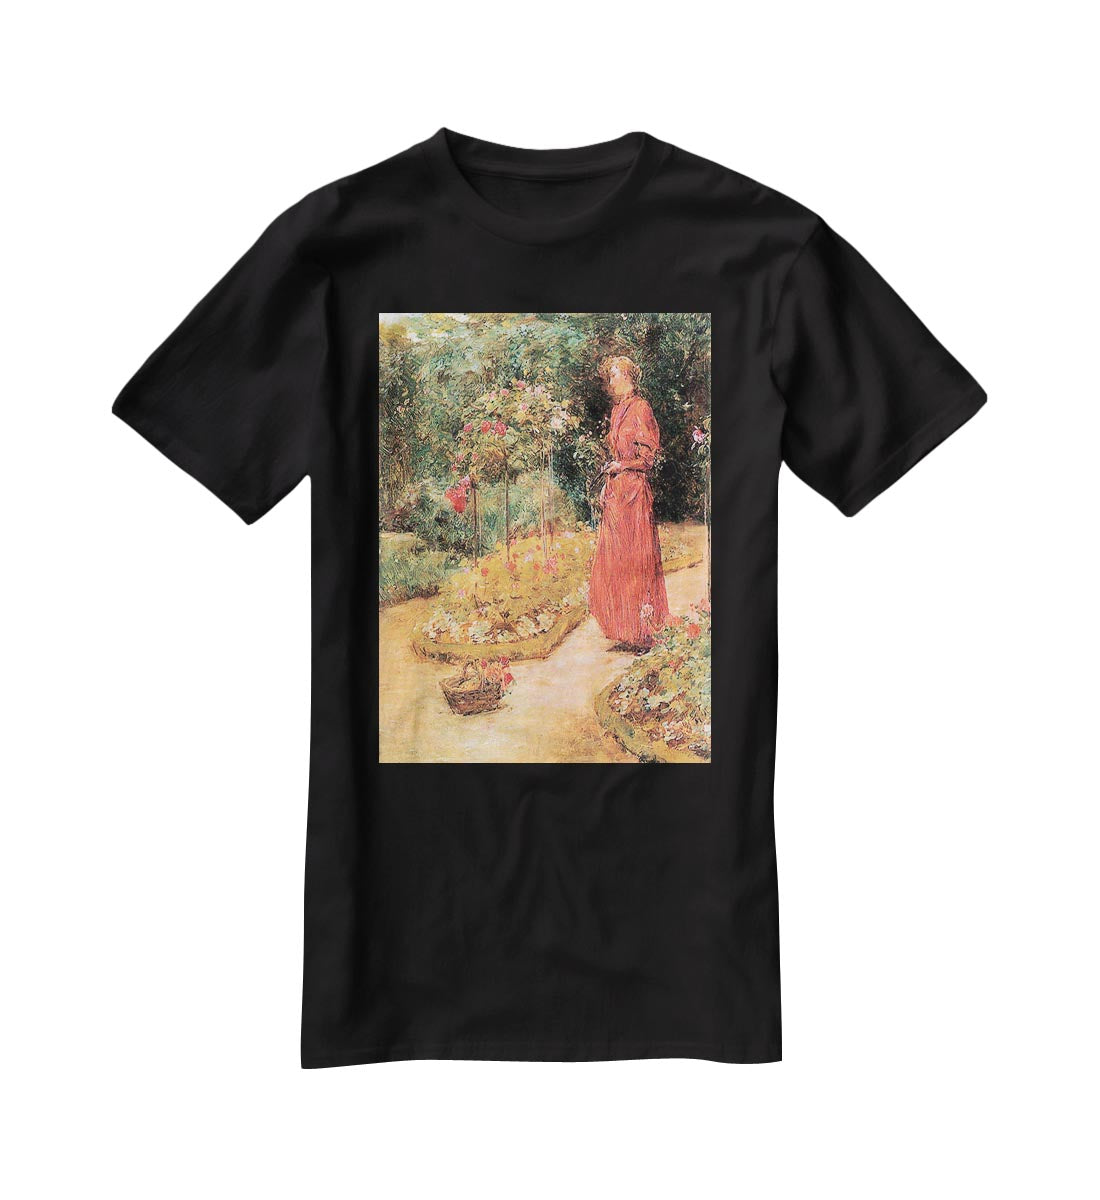 Woman cuts roses in a garden by Hassam T-Shirt - Canvas Art Rocks - 1